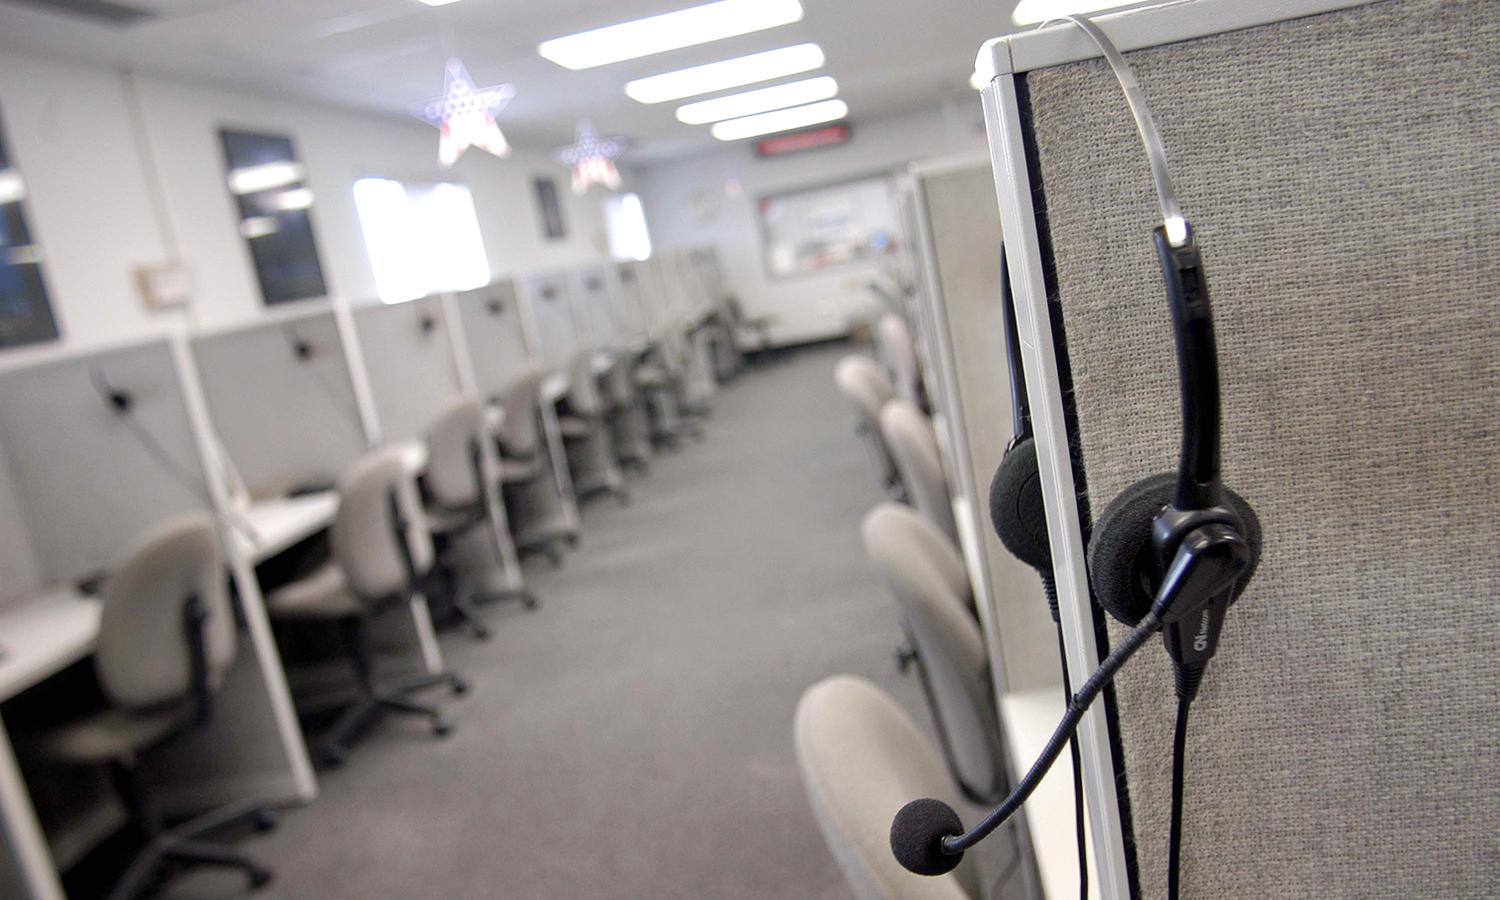 A headset hangs on a cubicle wall